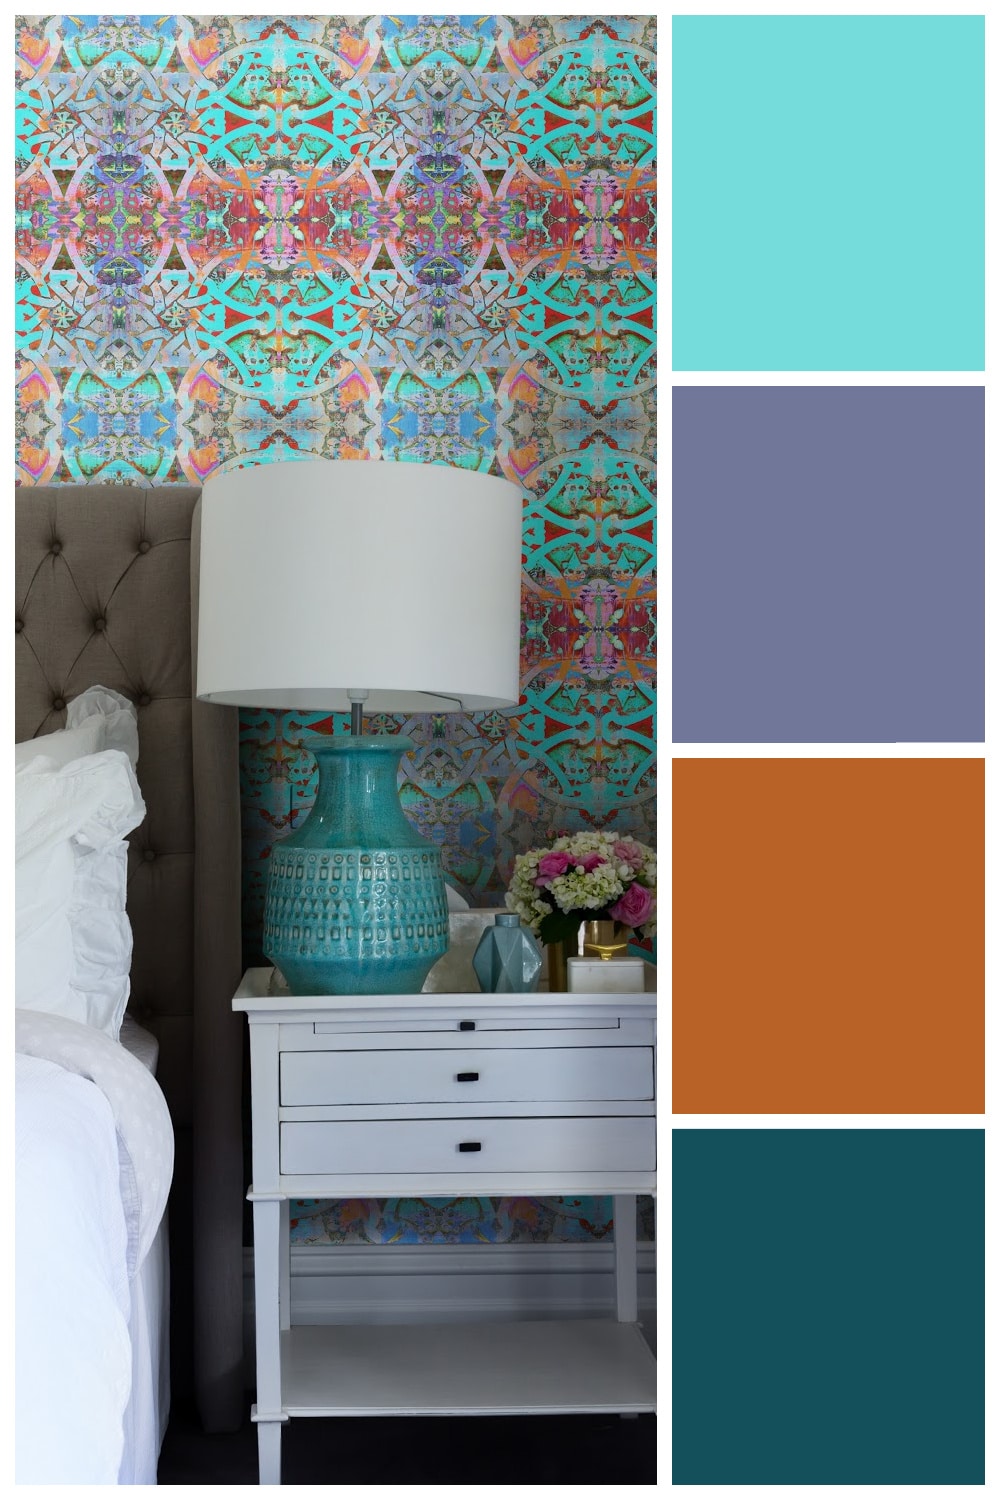 Use these color palettes, inspired by peel and stick wallpaper, to spark your creativity in your home decor. #peelandstickwallpaper #colorpalettes